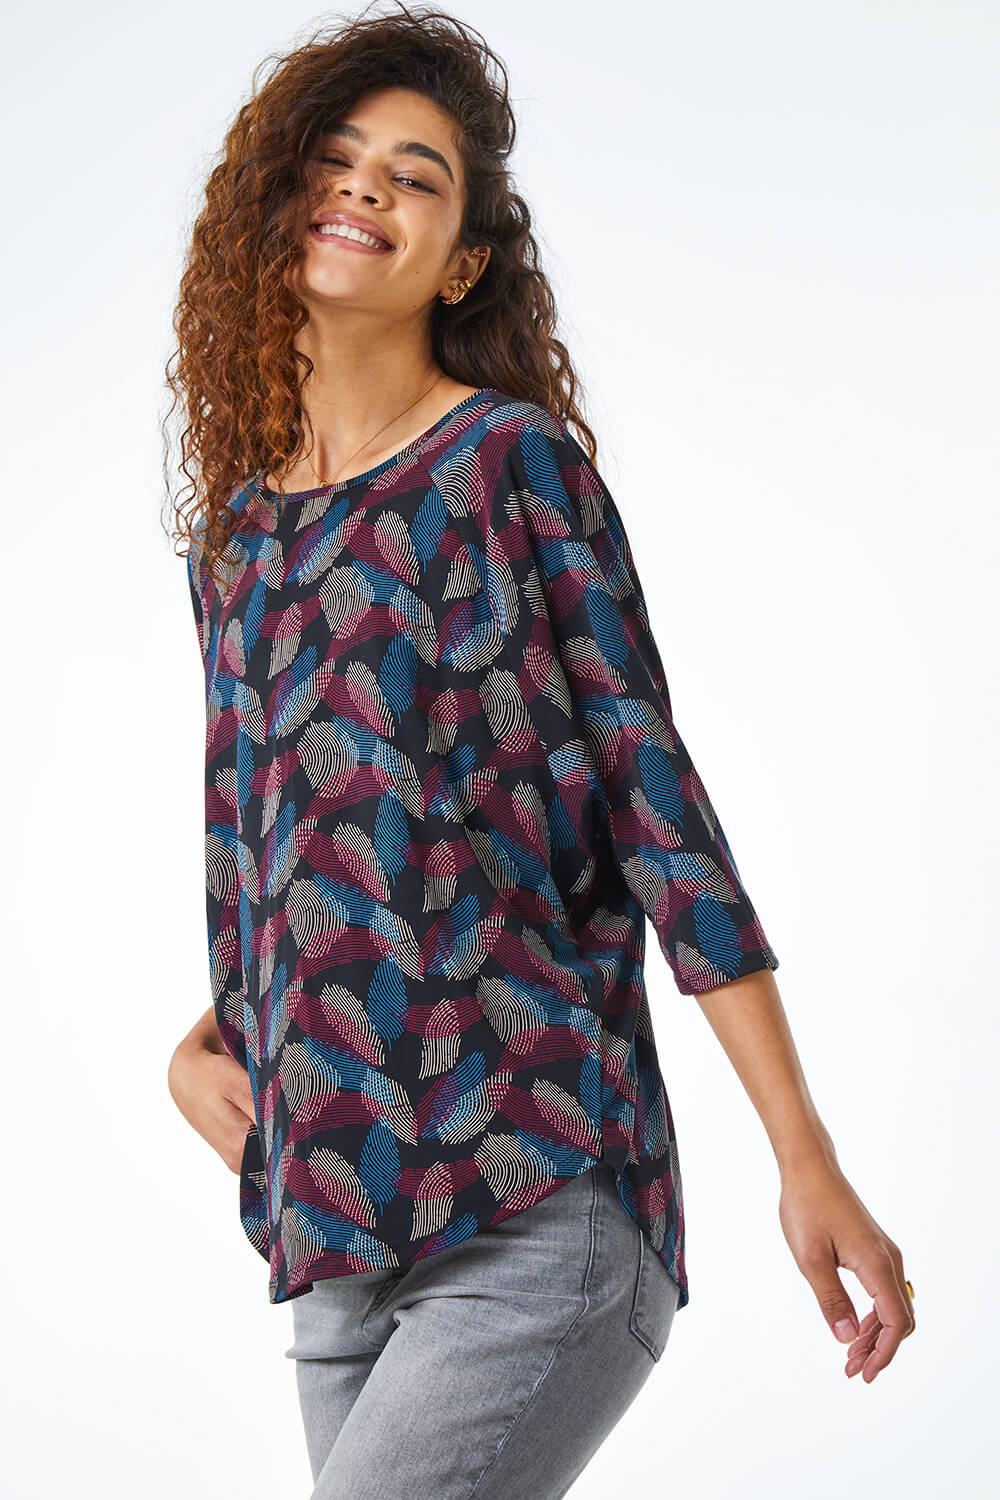 Black Abstract Linear Print Top, Image 2 of 5